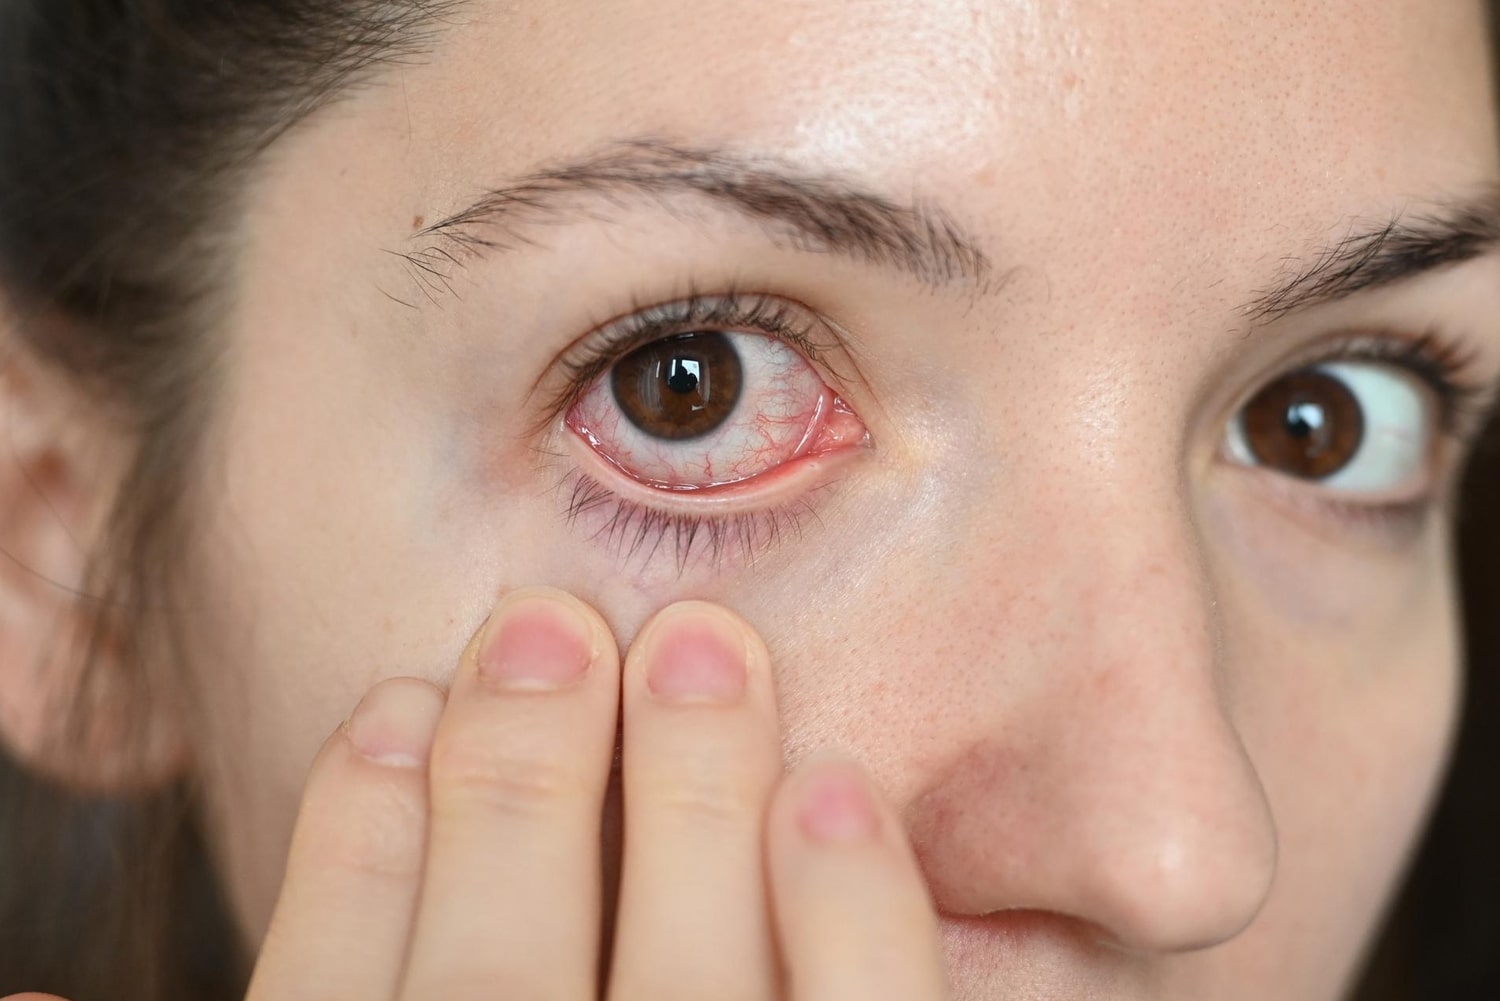 Lady with eye inflammation